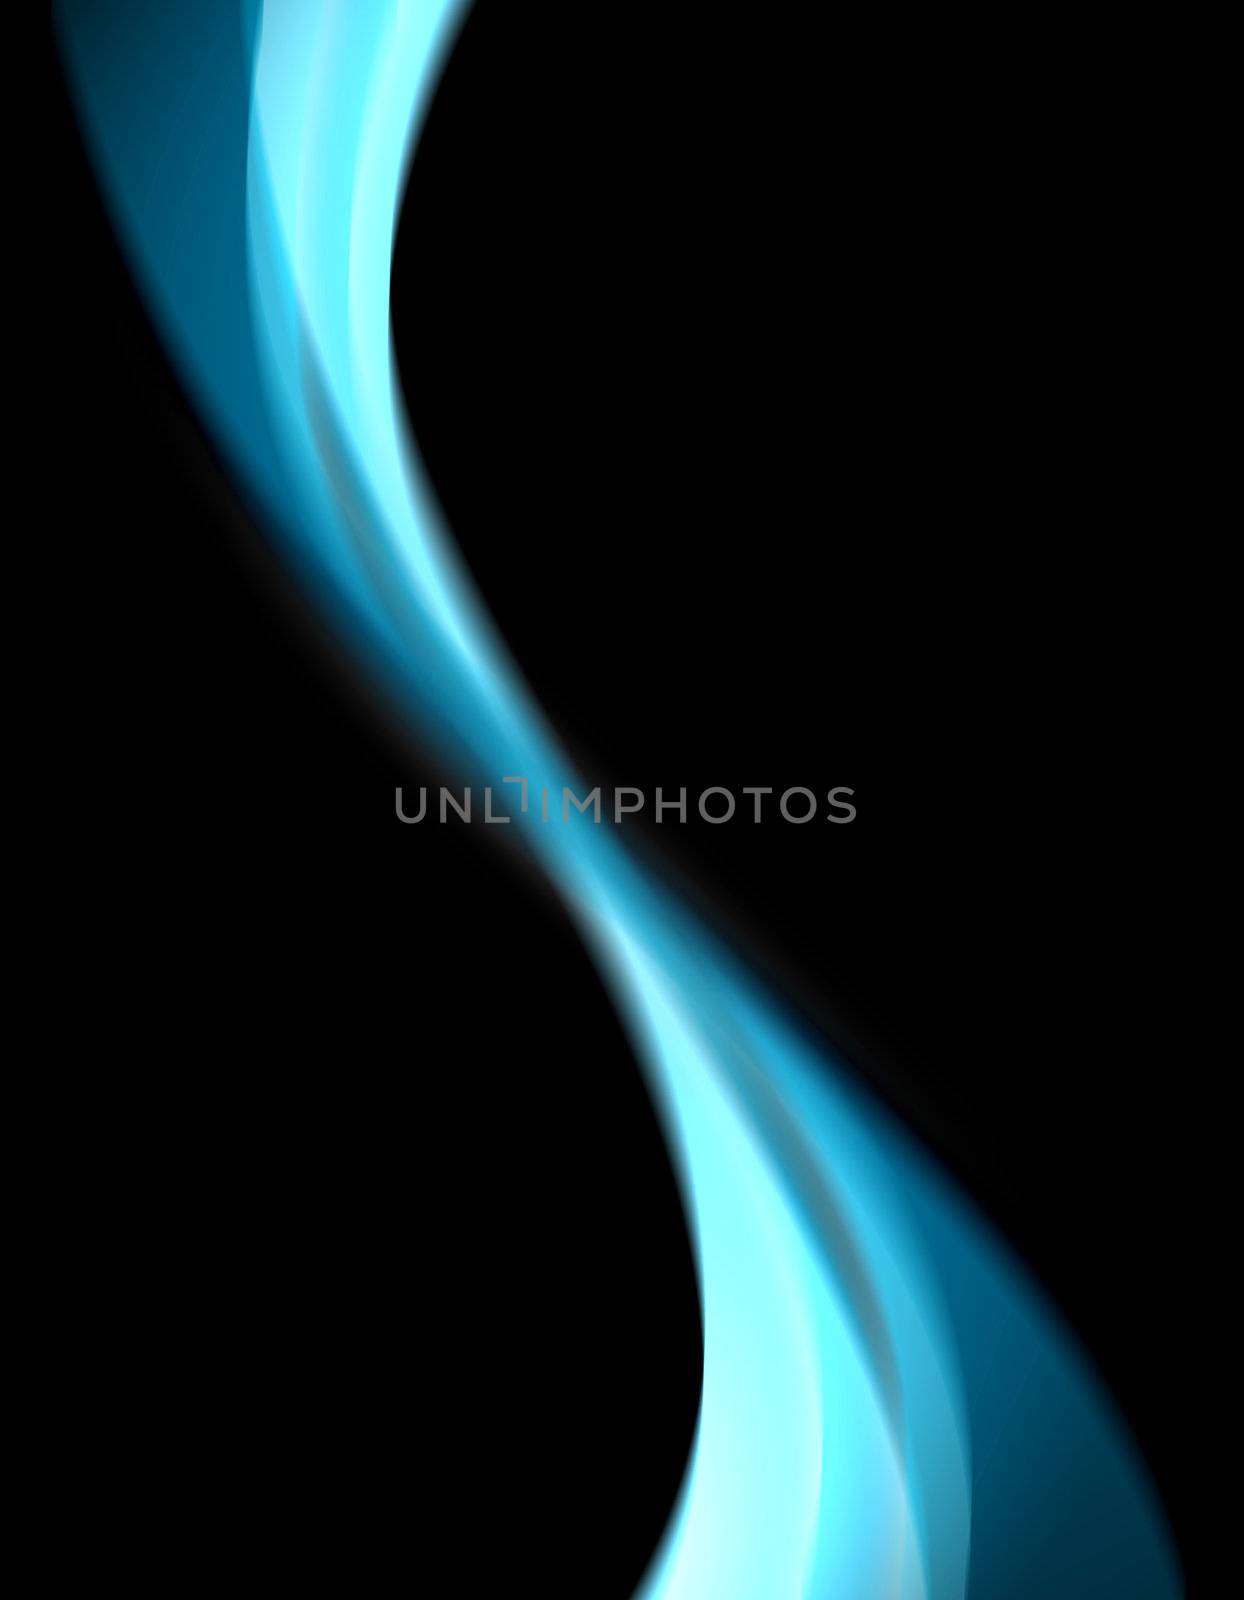 A wavy abstract layout - great for use as a design template or background.